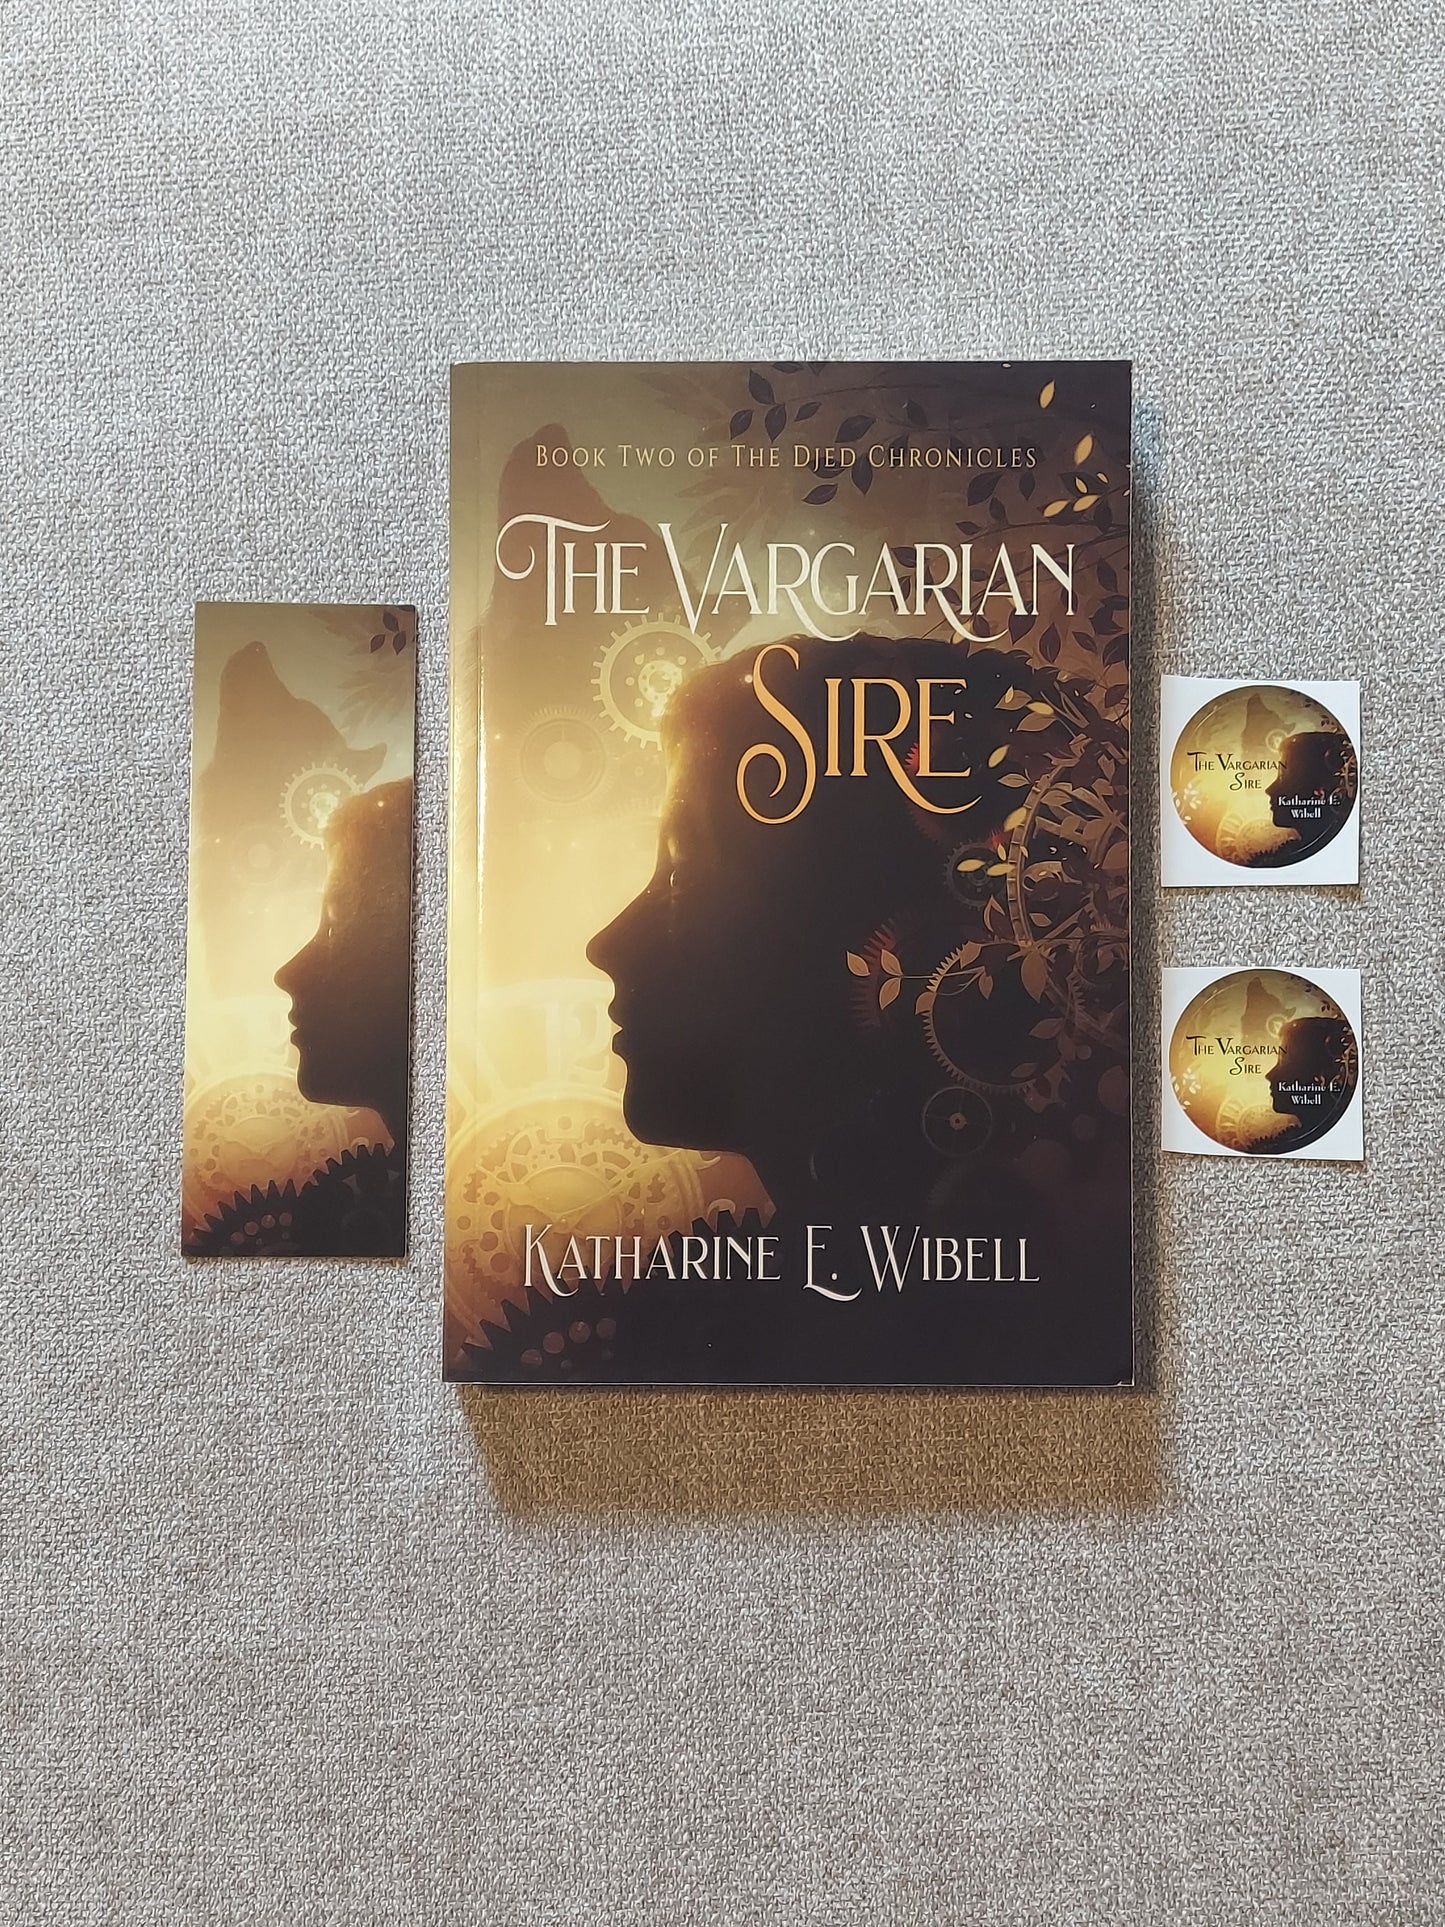 Print Formats - The Vargarian Sire: Book Two of The Djed Chronicles